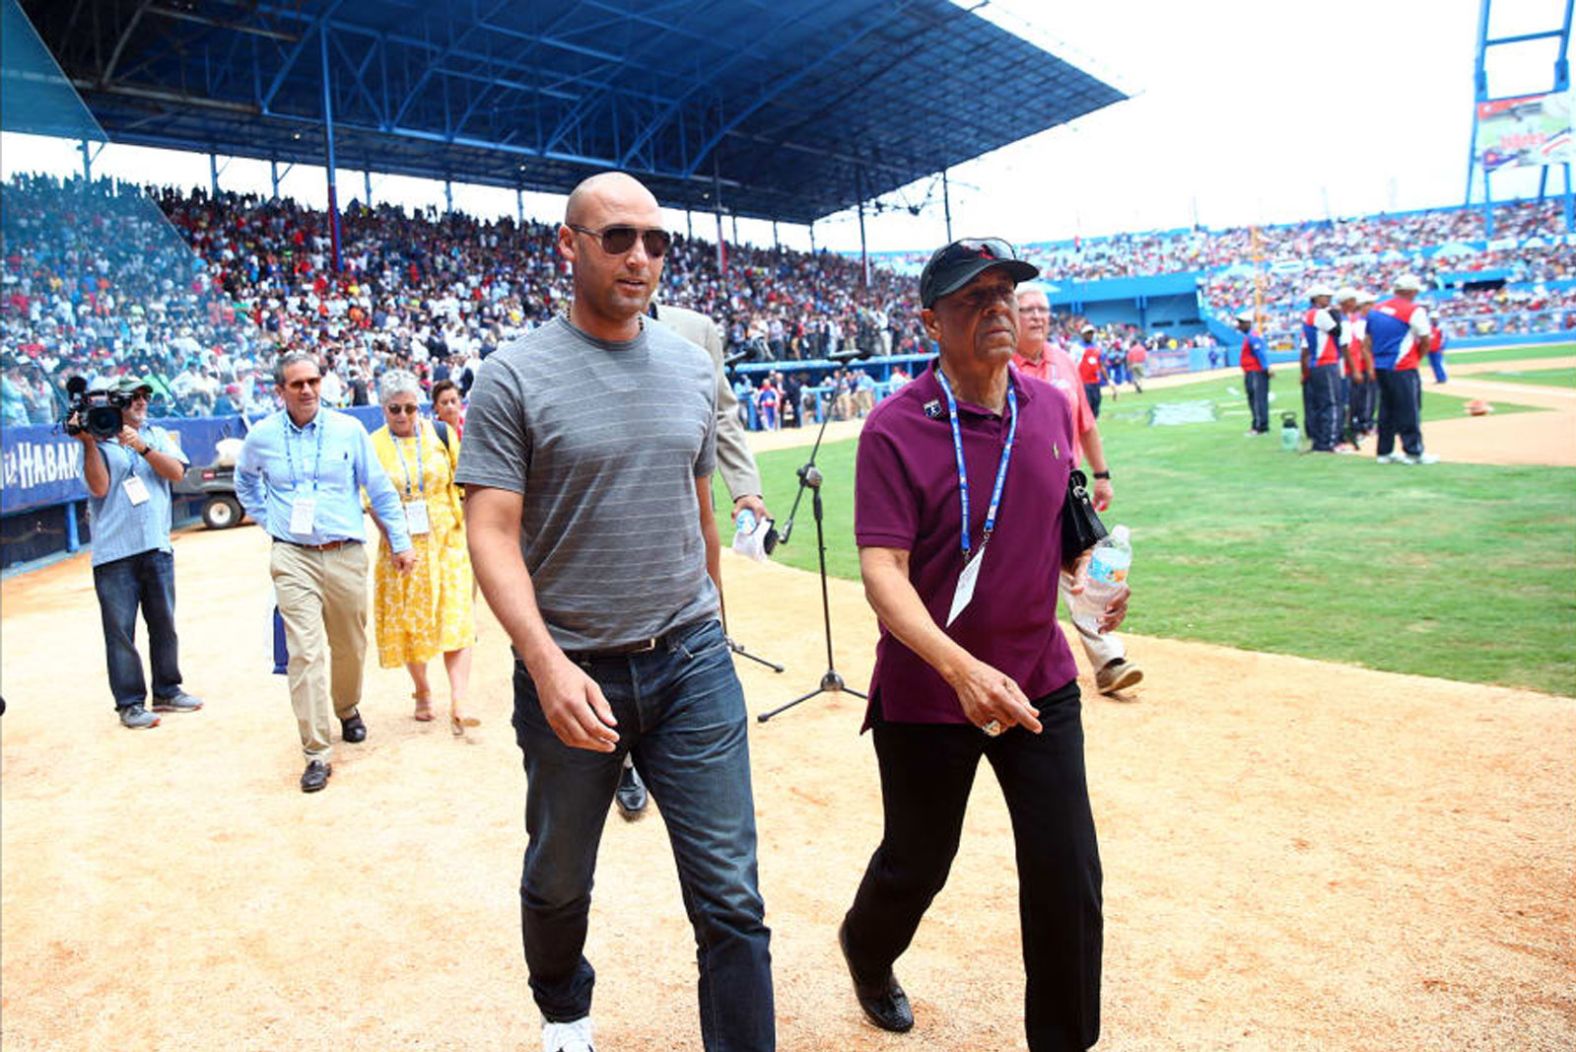 Jeter attends a baseball game in Havana, Cuba, in March 2016. The Cuban national team was playing the Tampa Bay Rays in a special exhibition.